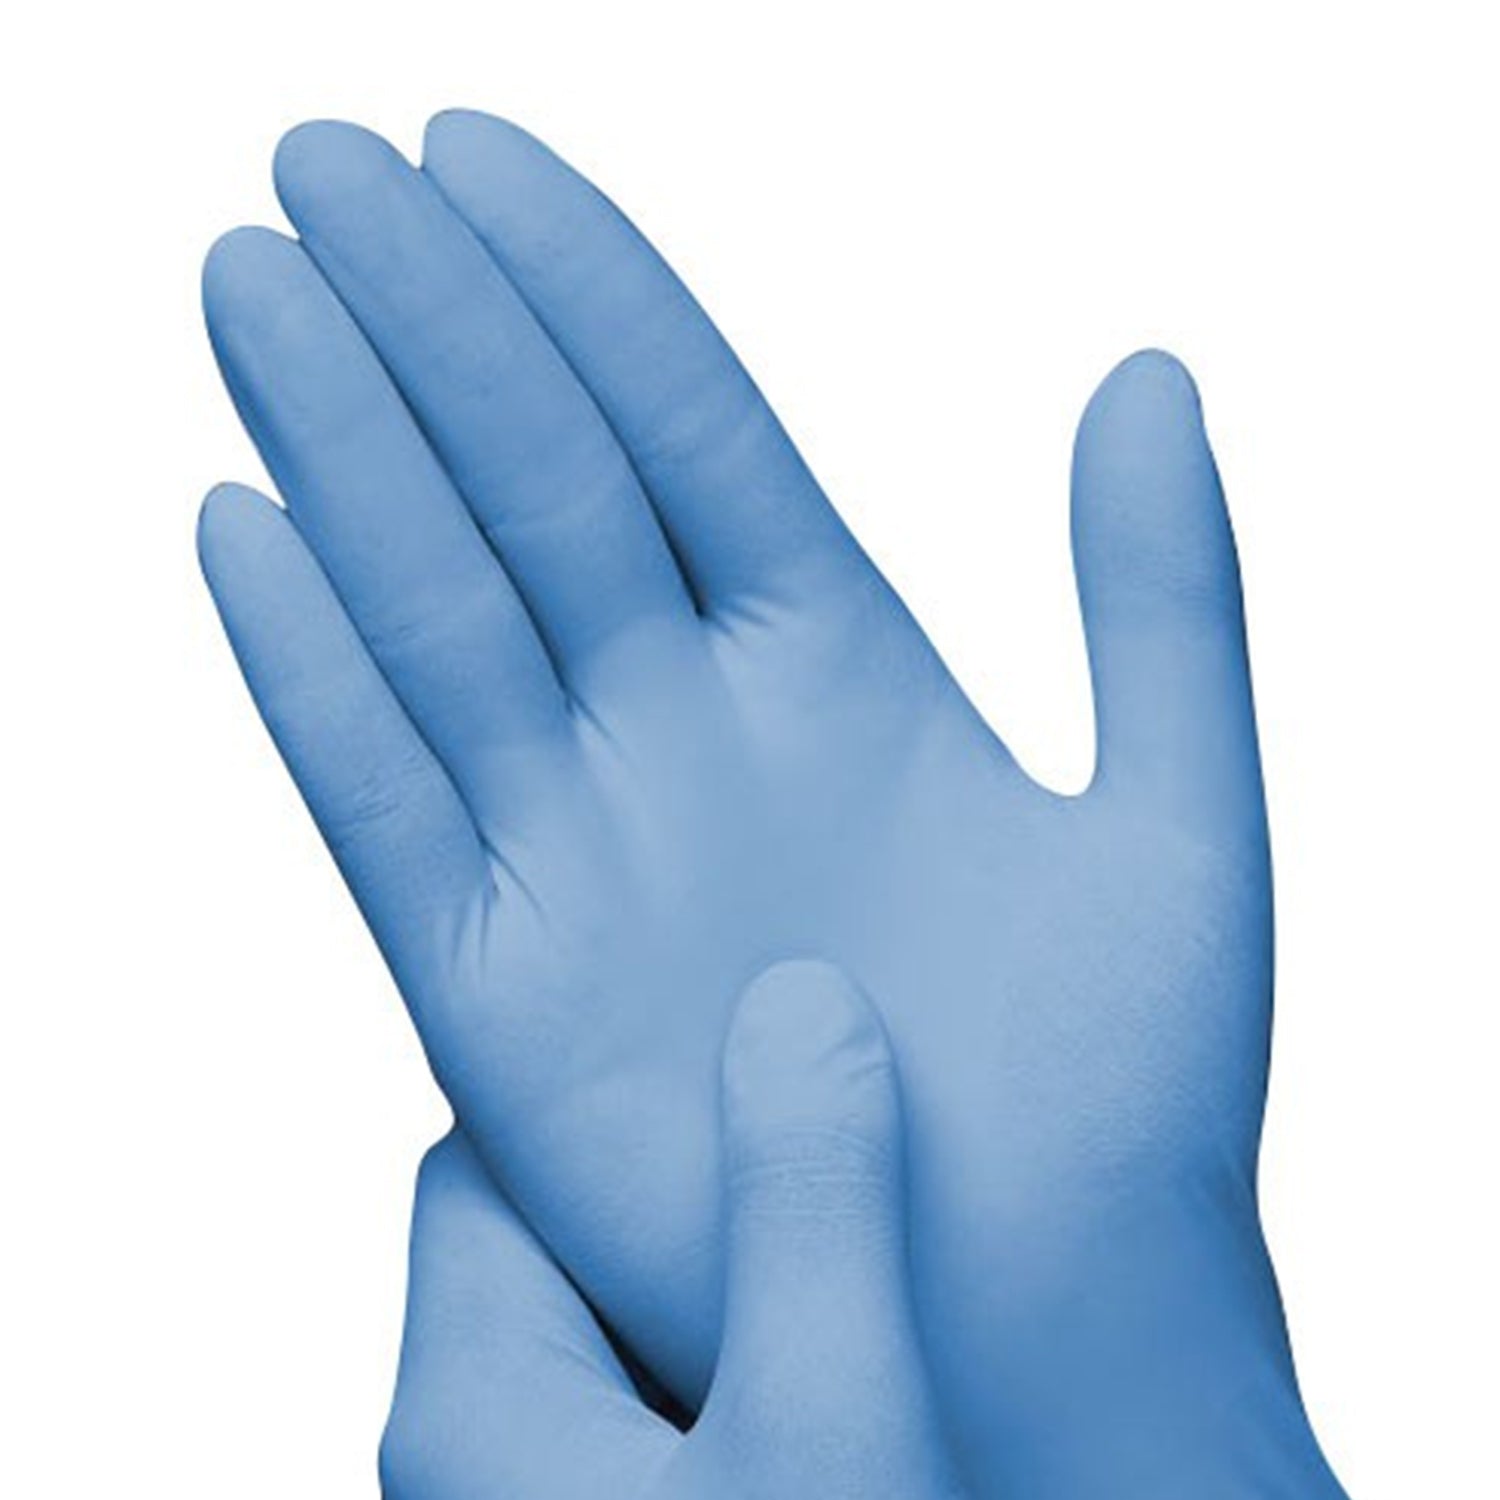 Premier AF Nitrile Examination Gloves | Sterile | Latex Free | Small | Pack of 50 Pairs (3)